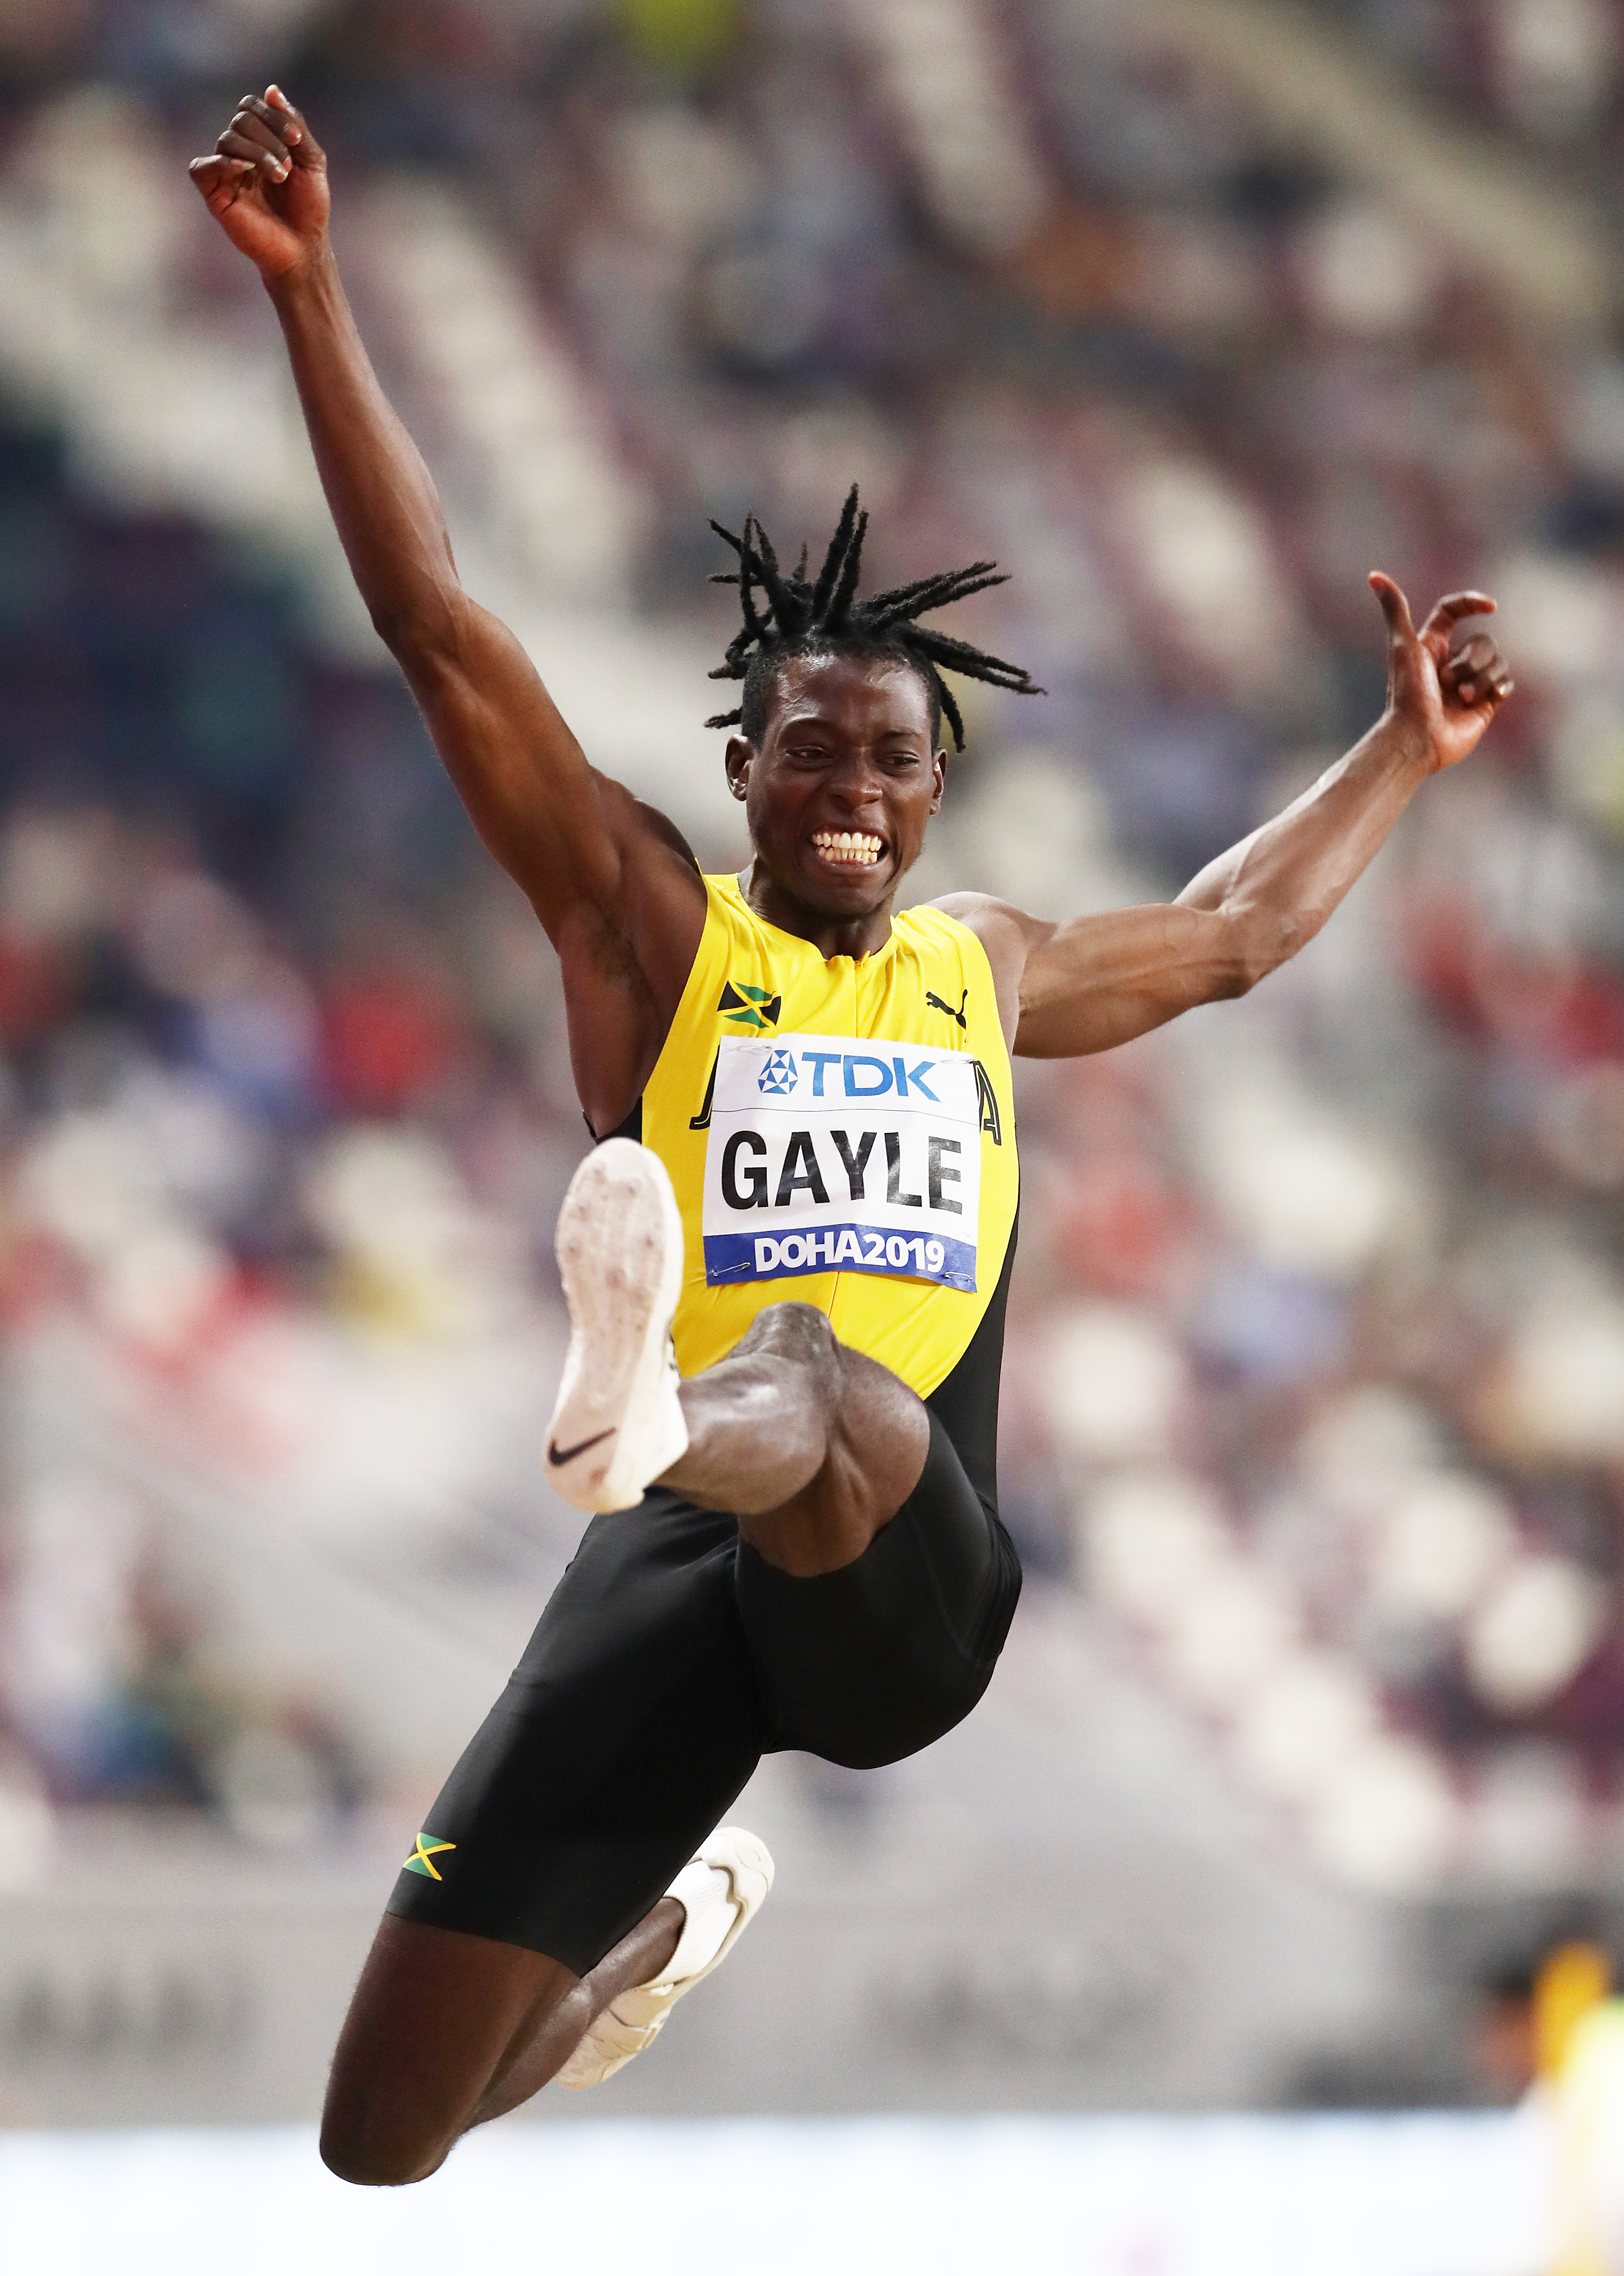 Jamaican Gayle finishes 3rd in Switzerland